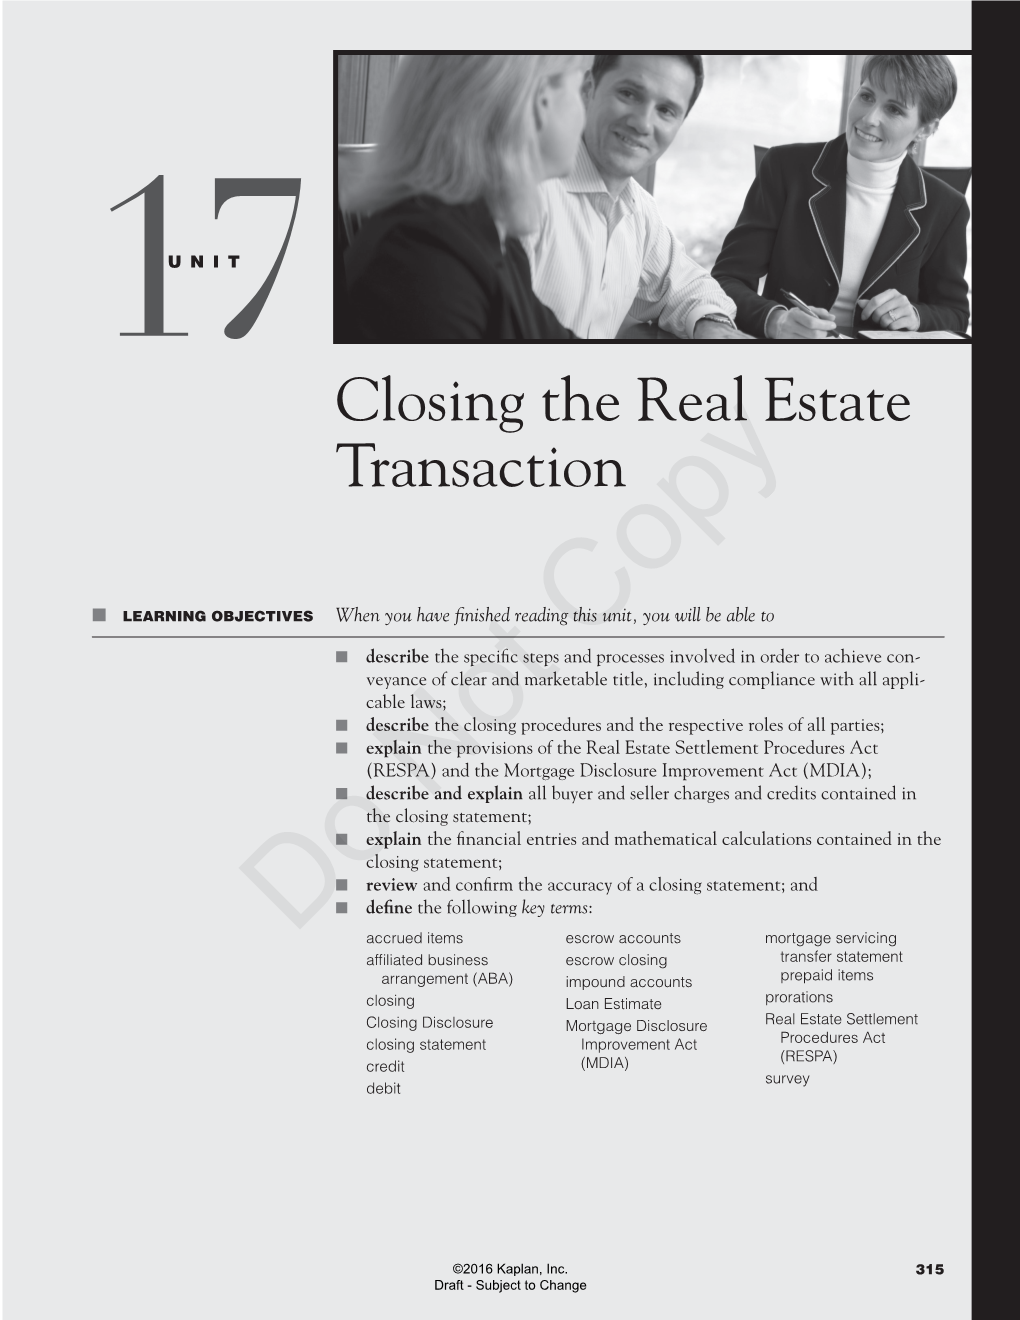 Closing the Real Estate Transaction